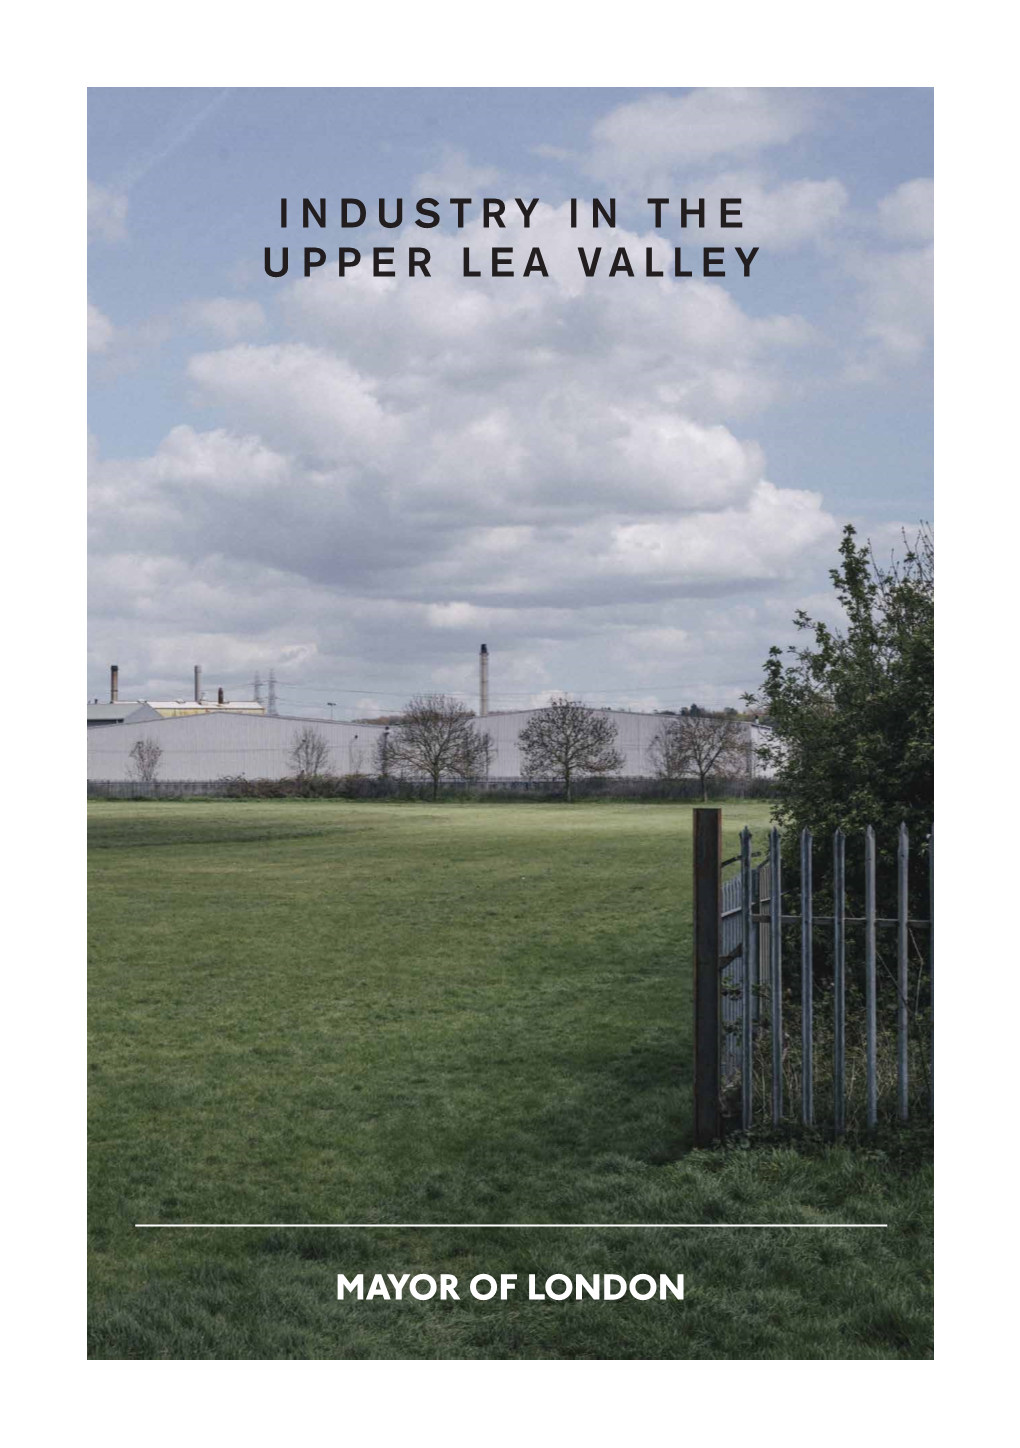 INDUSTRY in the UPPER LEA VALLEY Copyright Contents